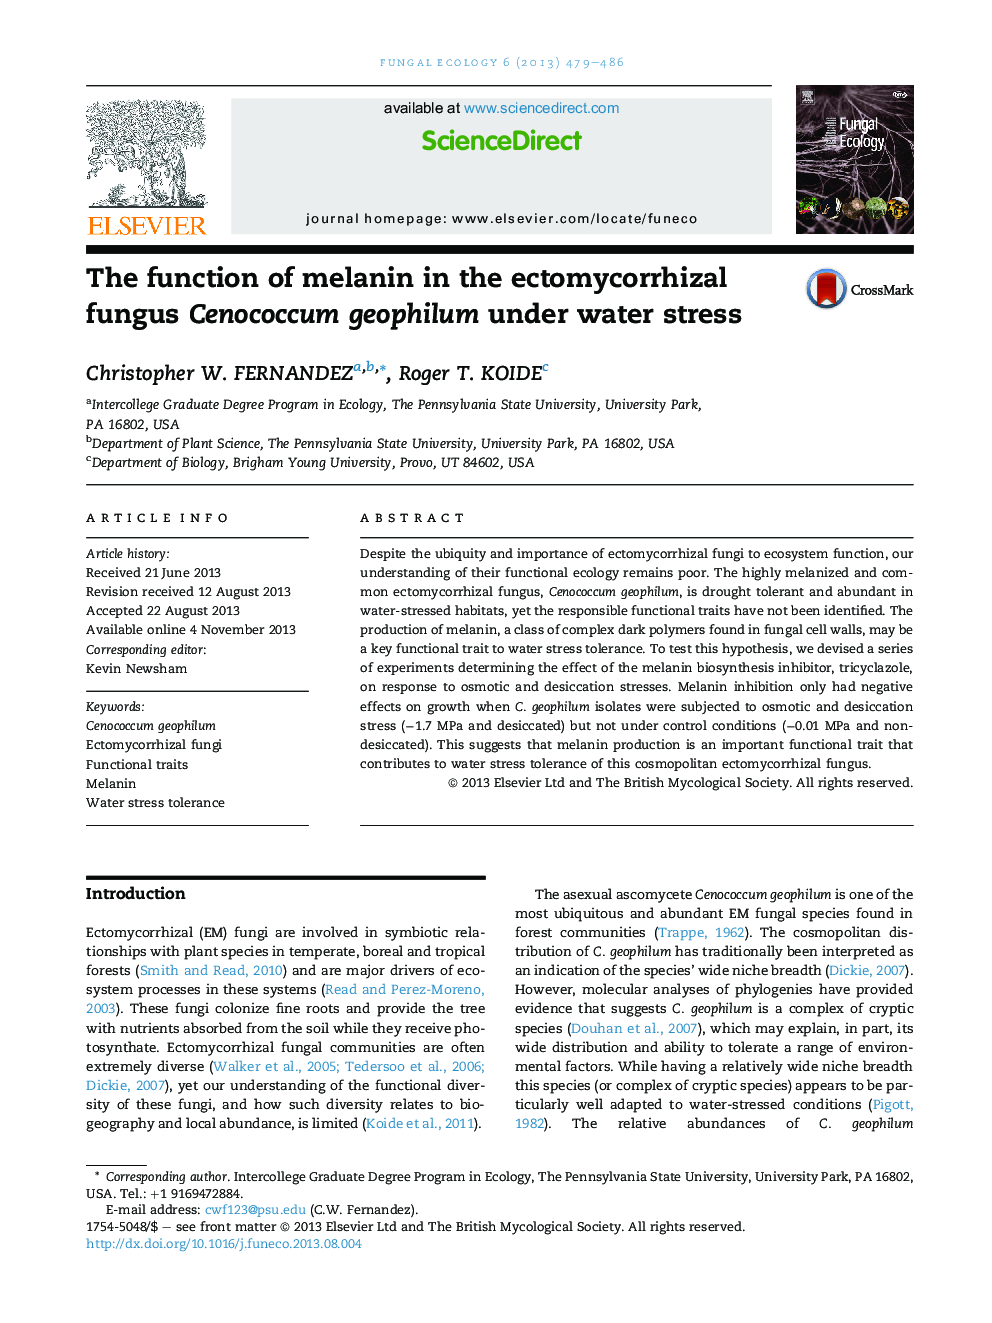 The function of melanin in the ectomycorrhizal fungus Cenococcum geophilum under water stress